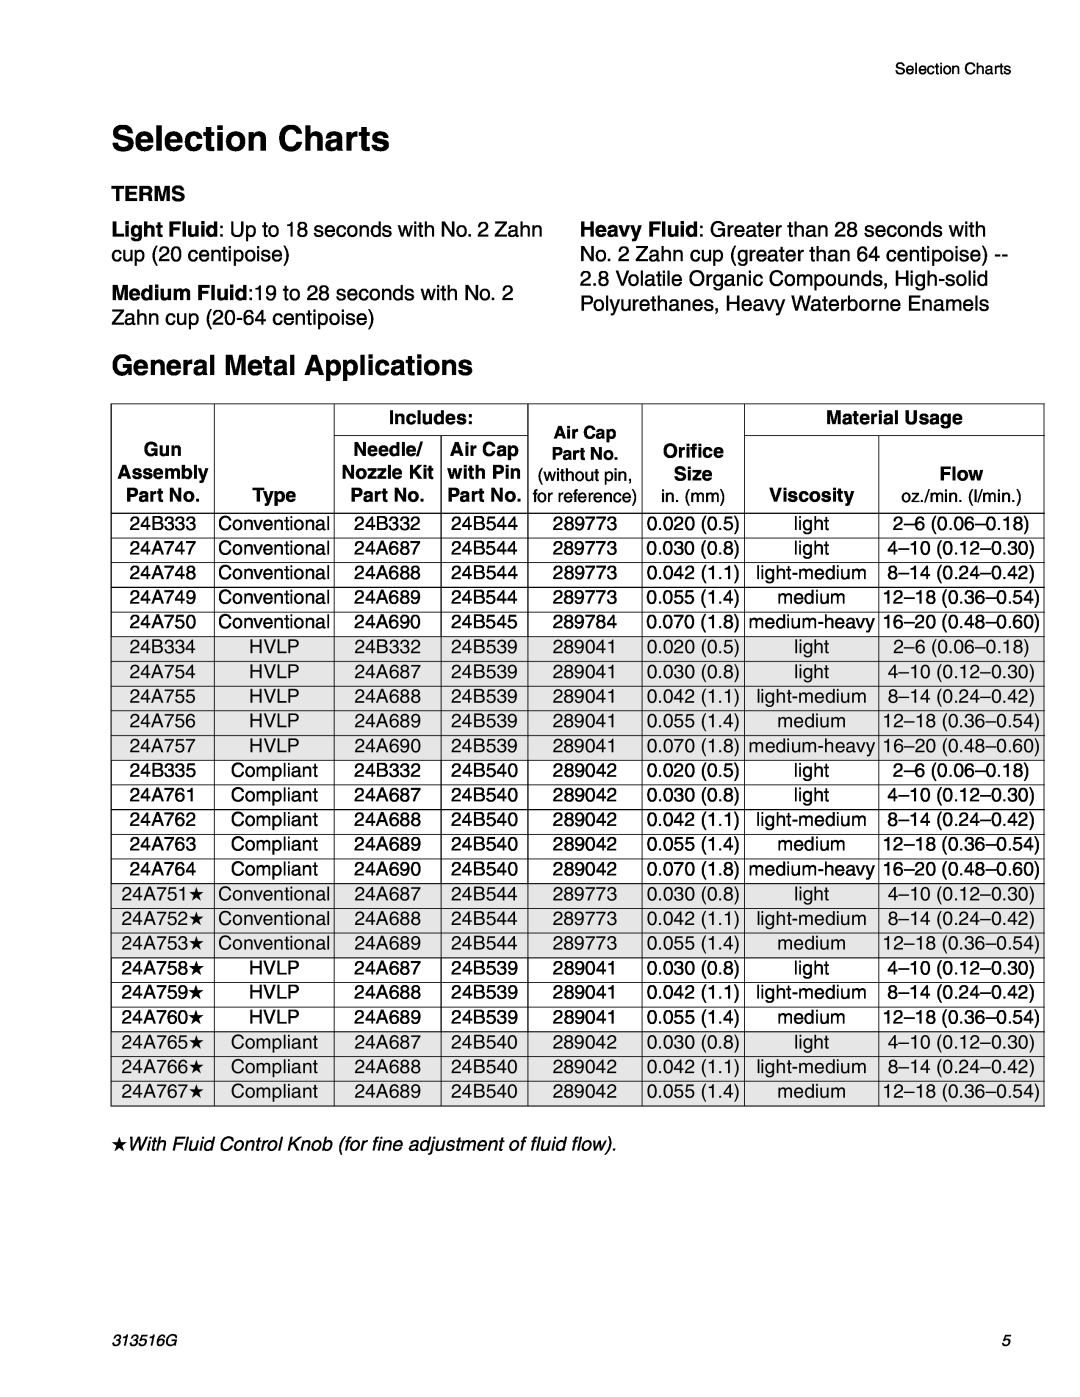 Graco ti13586a, ti13585a important safety instructions Selection Charts, General Metal Applications, Terms 